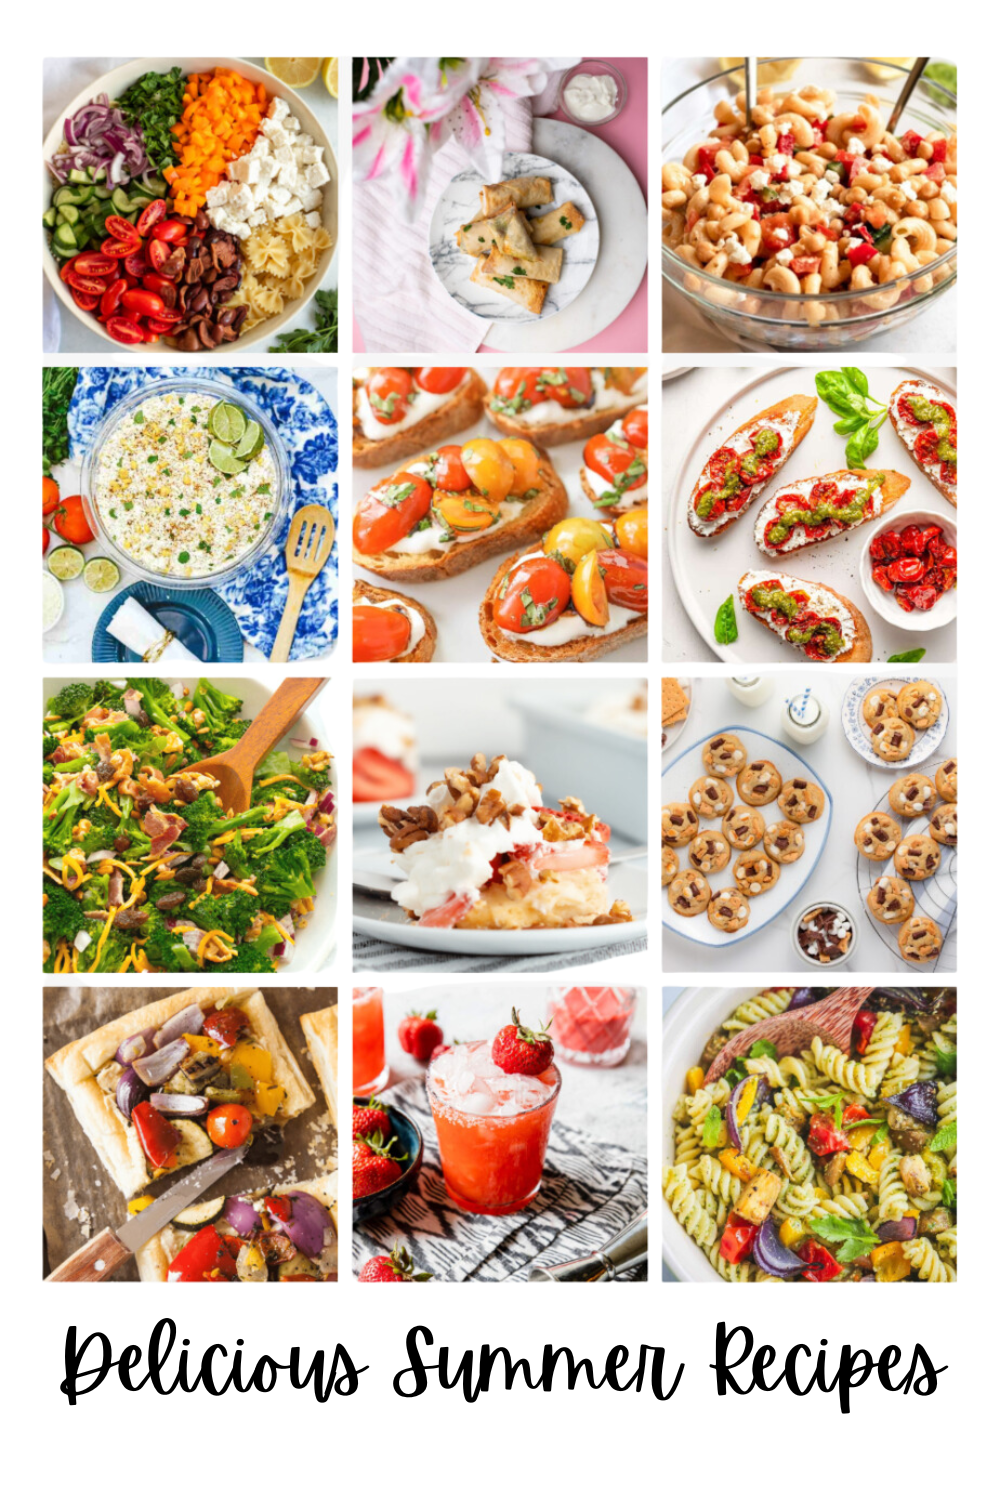 Savor the flavors of summer with our top 25+ recipes! From the tangy Mexican Street Corn Pasta Salad to the sweet Lemon Dream Cake, we've got you covered for any summer feast. These quick and delicious dishes are perfect for sharing with friends and family! 🍽️🌽🍋 #SummerCooking #DeliciousMeals